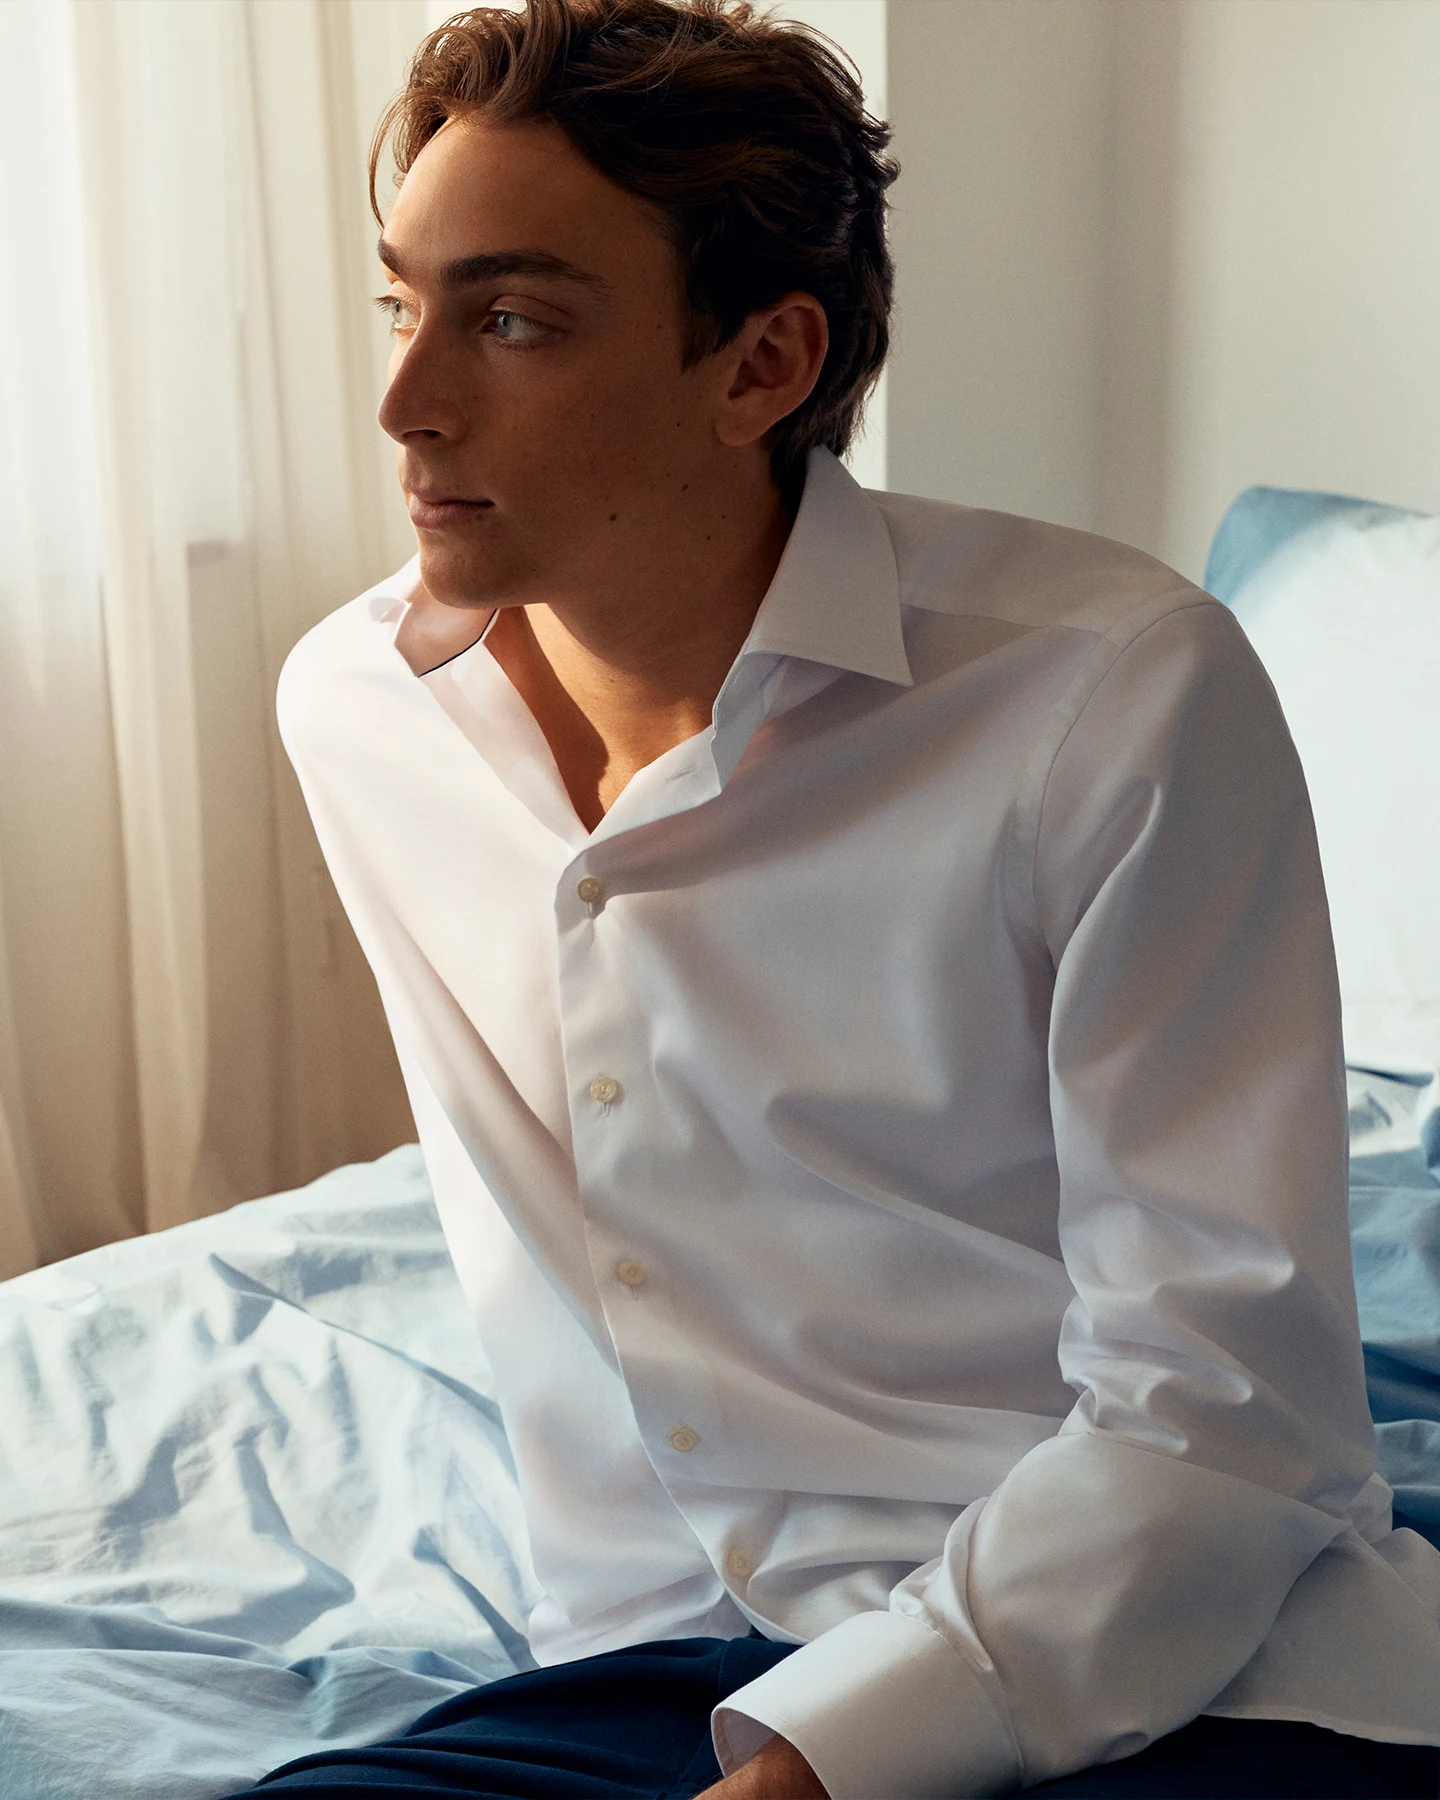 Mondo sitting on a bed with a white shirt